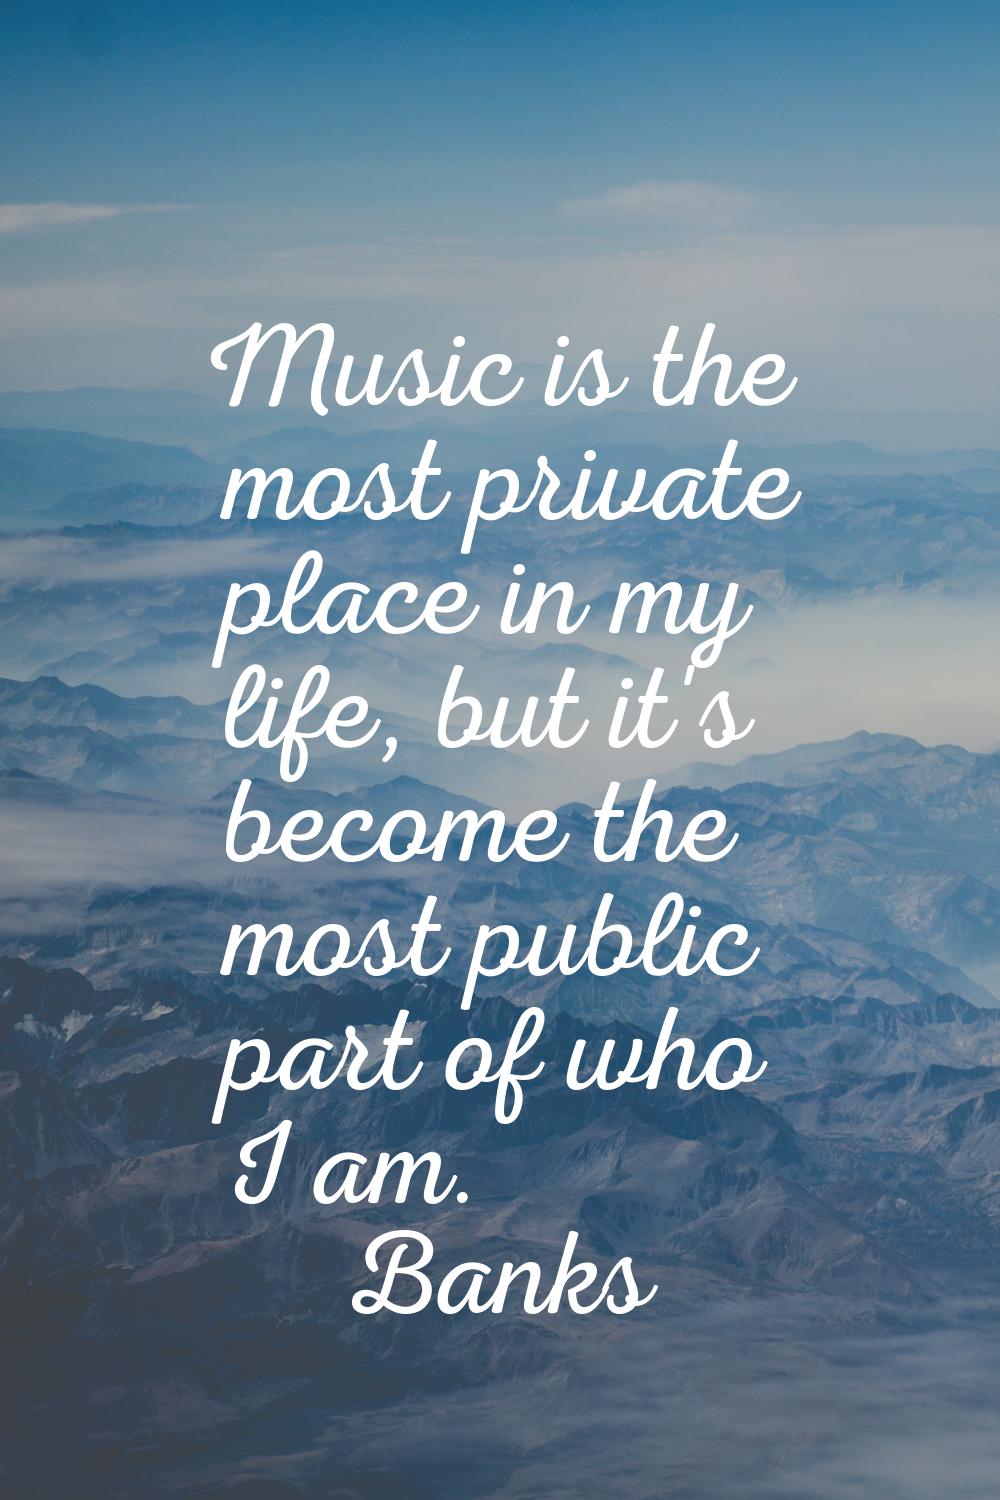 Music is the most private place in my life, but it's become the most public part of who I am.